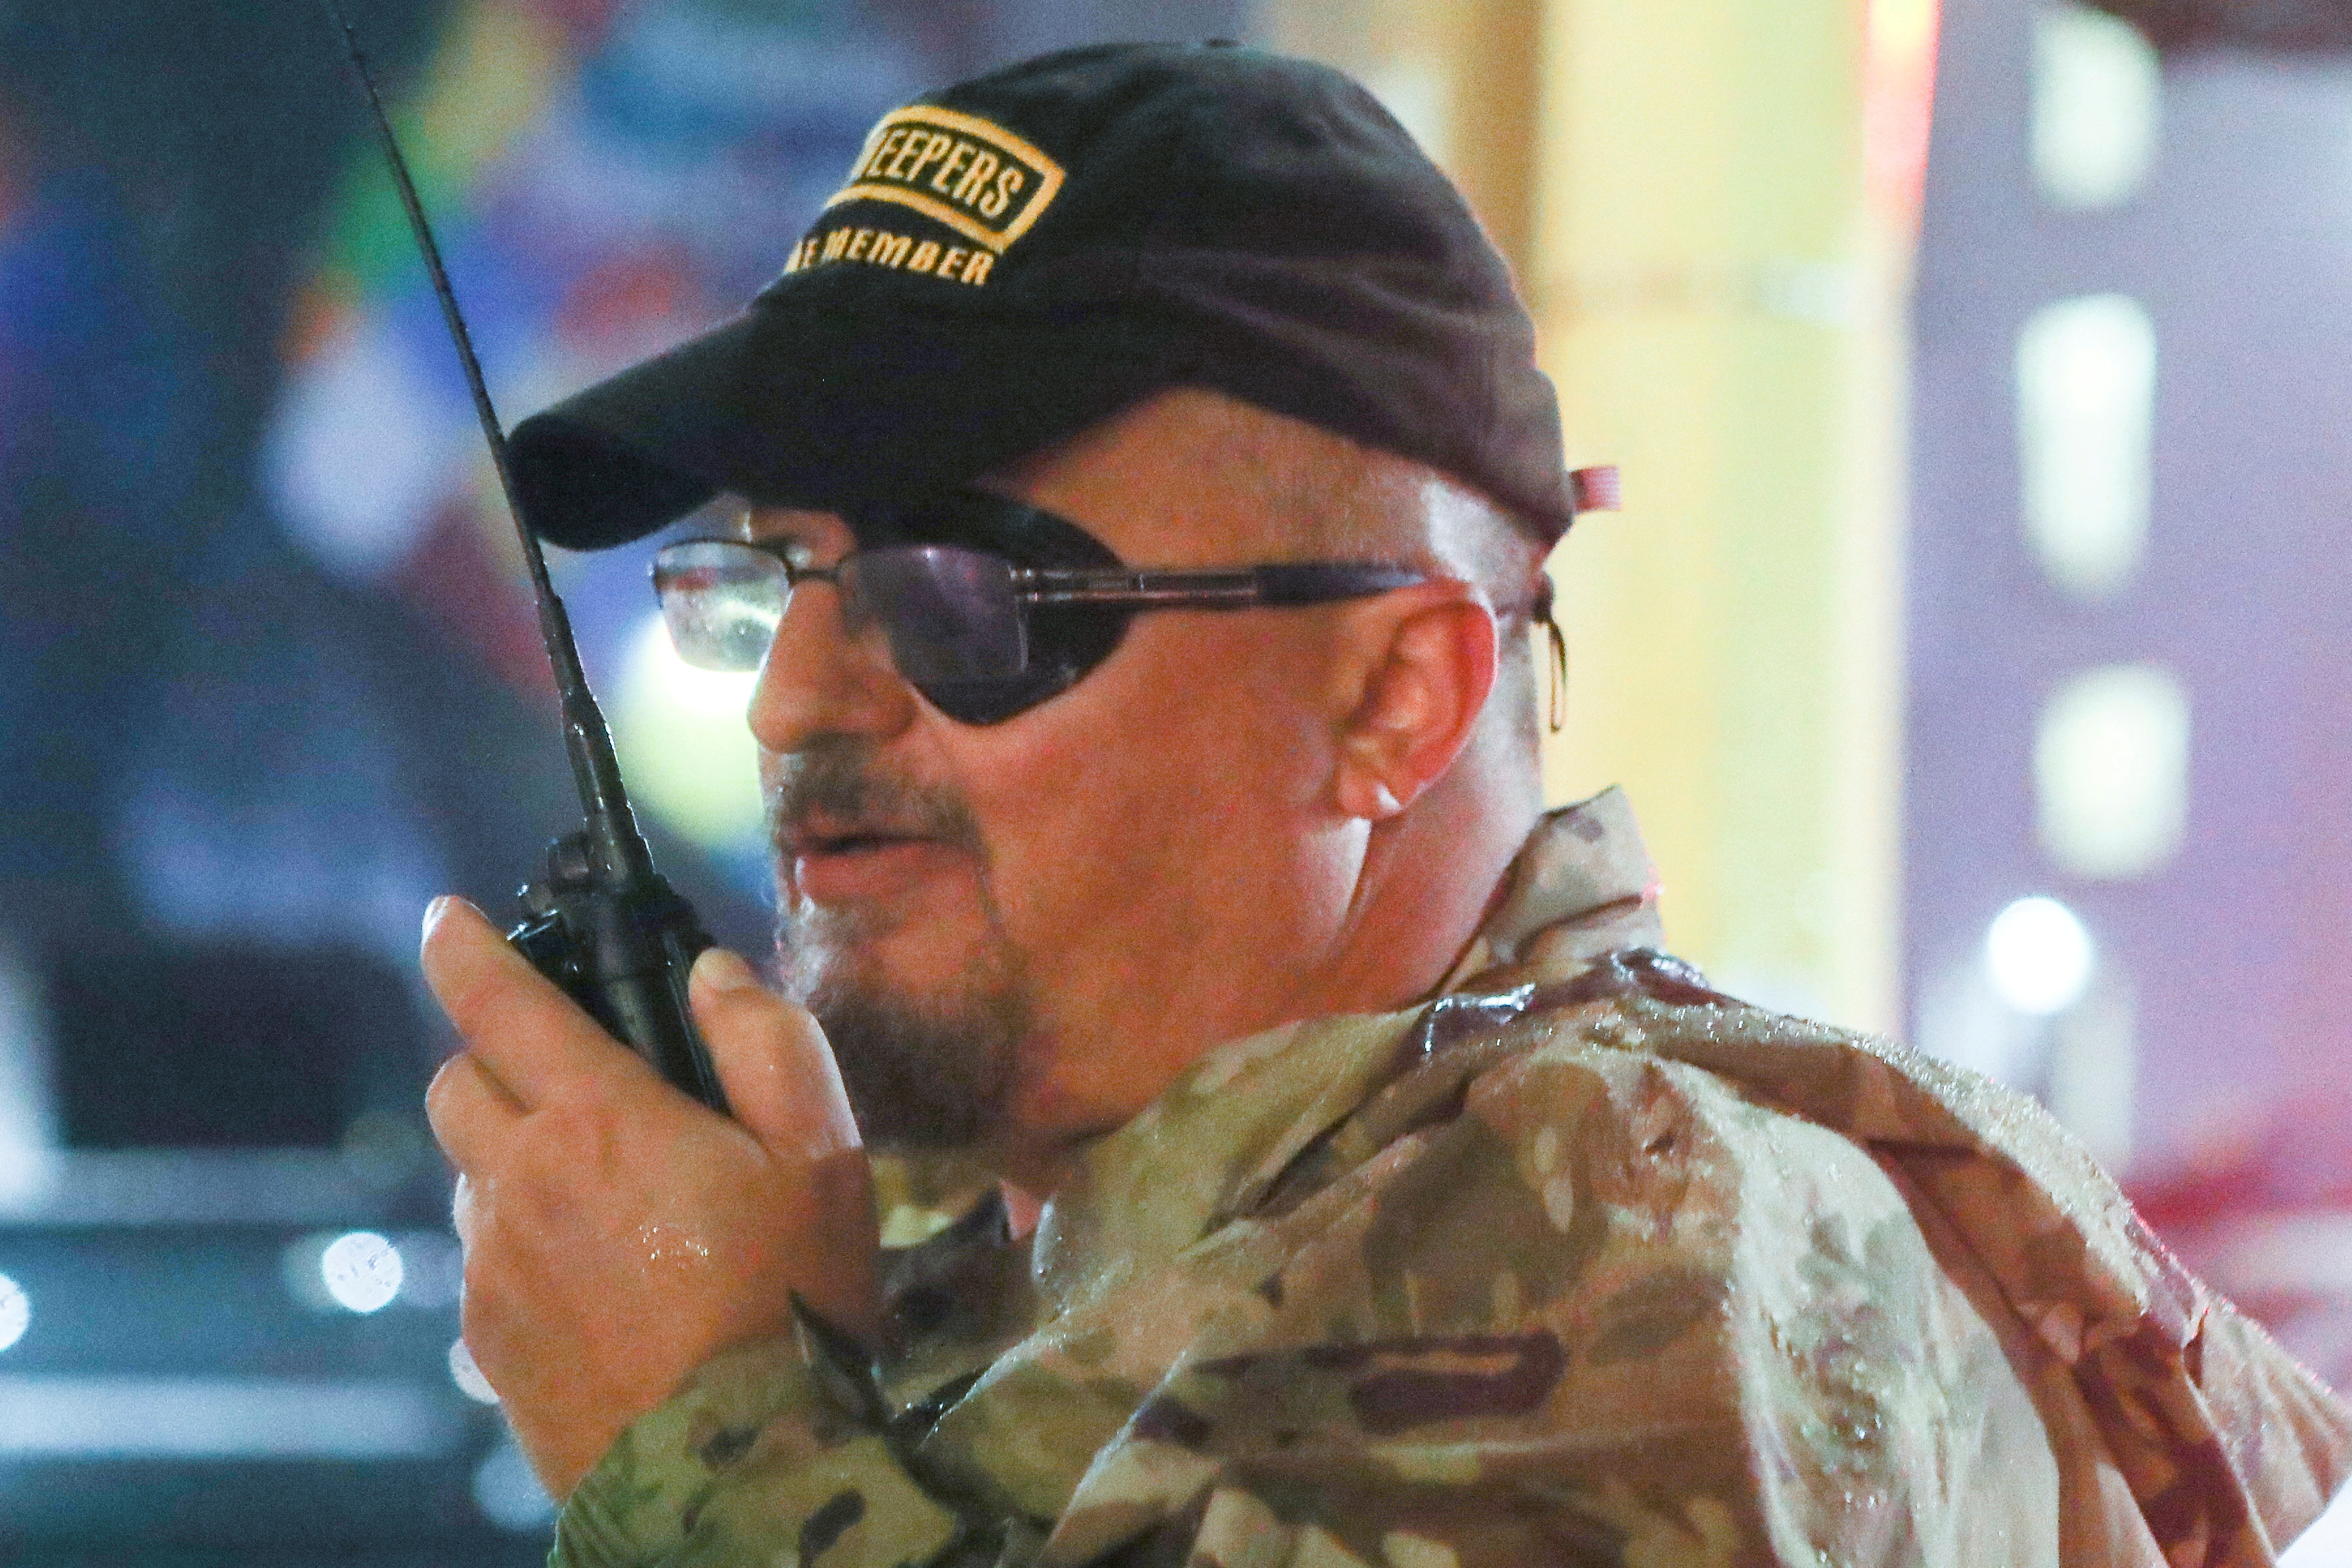 Stewart Rhodes of the Oath Keepers uses a radio as he departs a Trump rally in Minneapolis